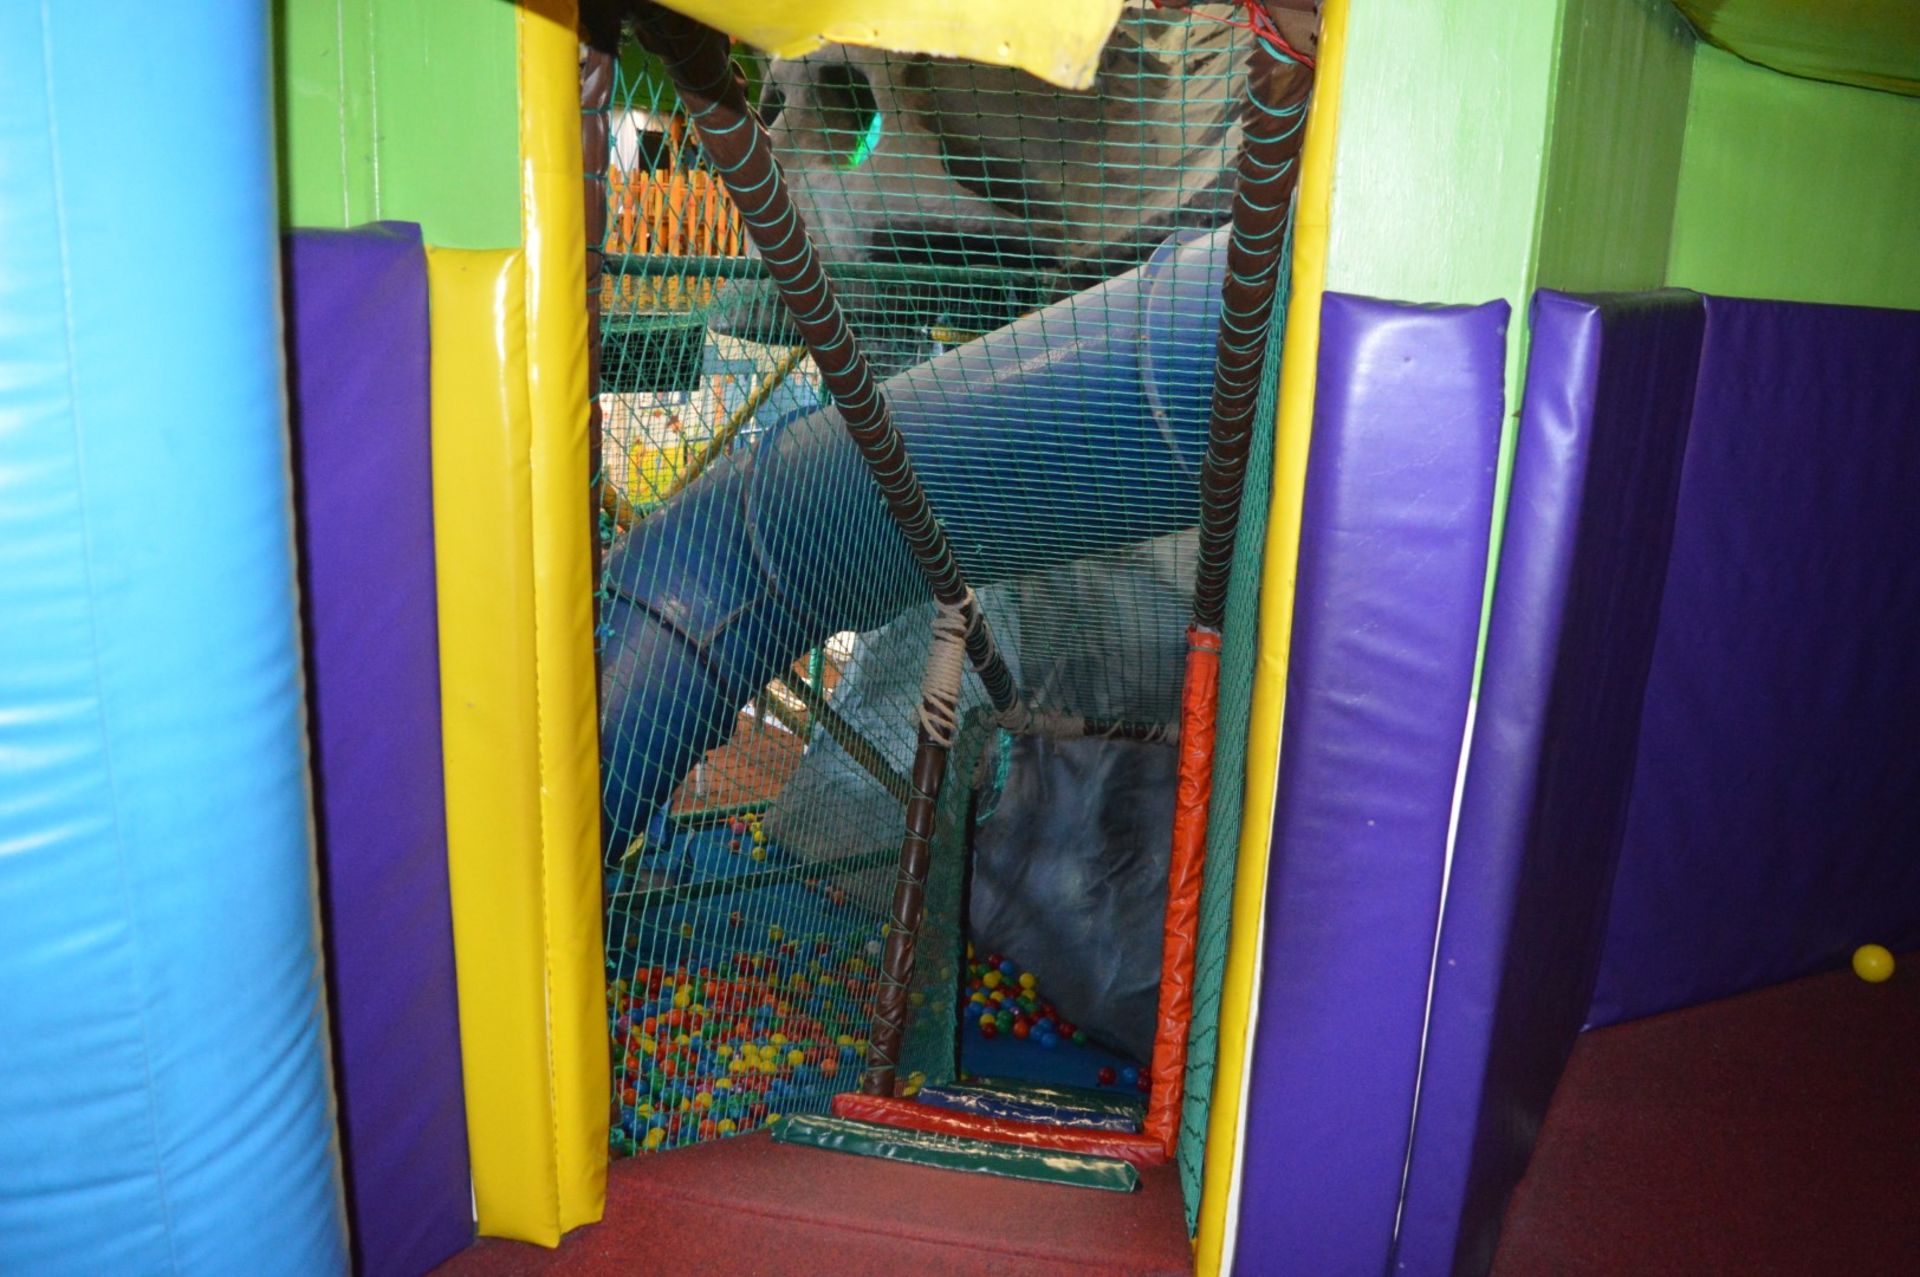 1 x Large Amount of Playcentre Safety Padding and Netting - Includes Lots of Various Designs and - Image 11 of 25